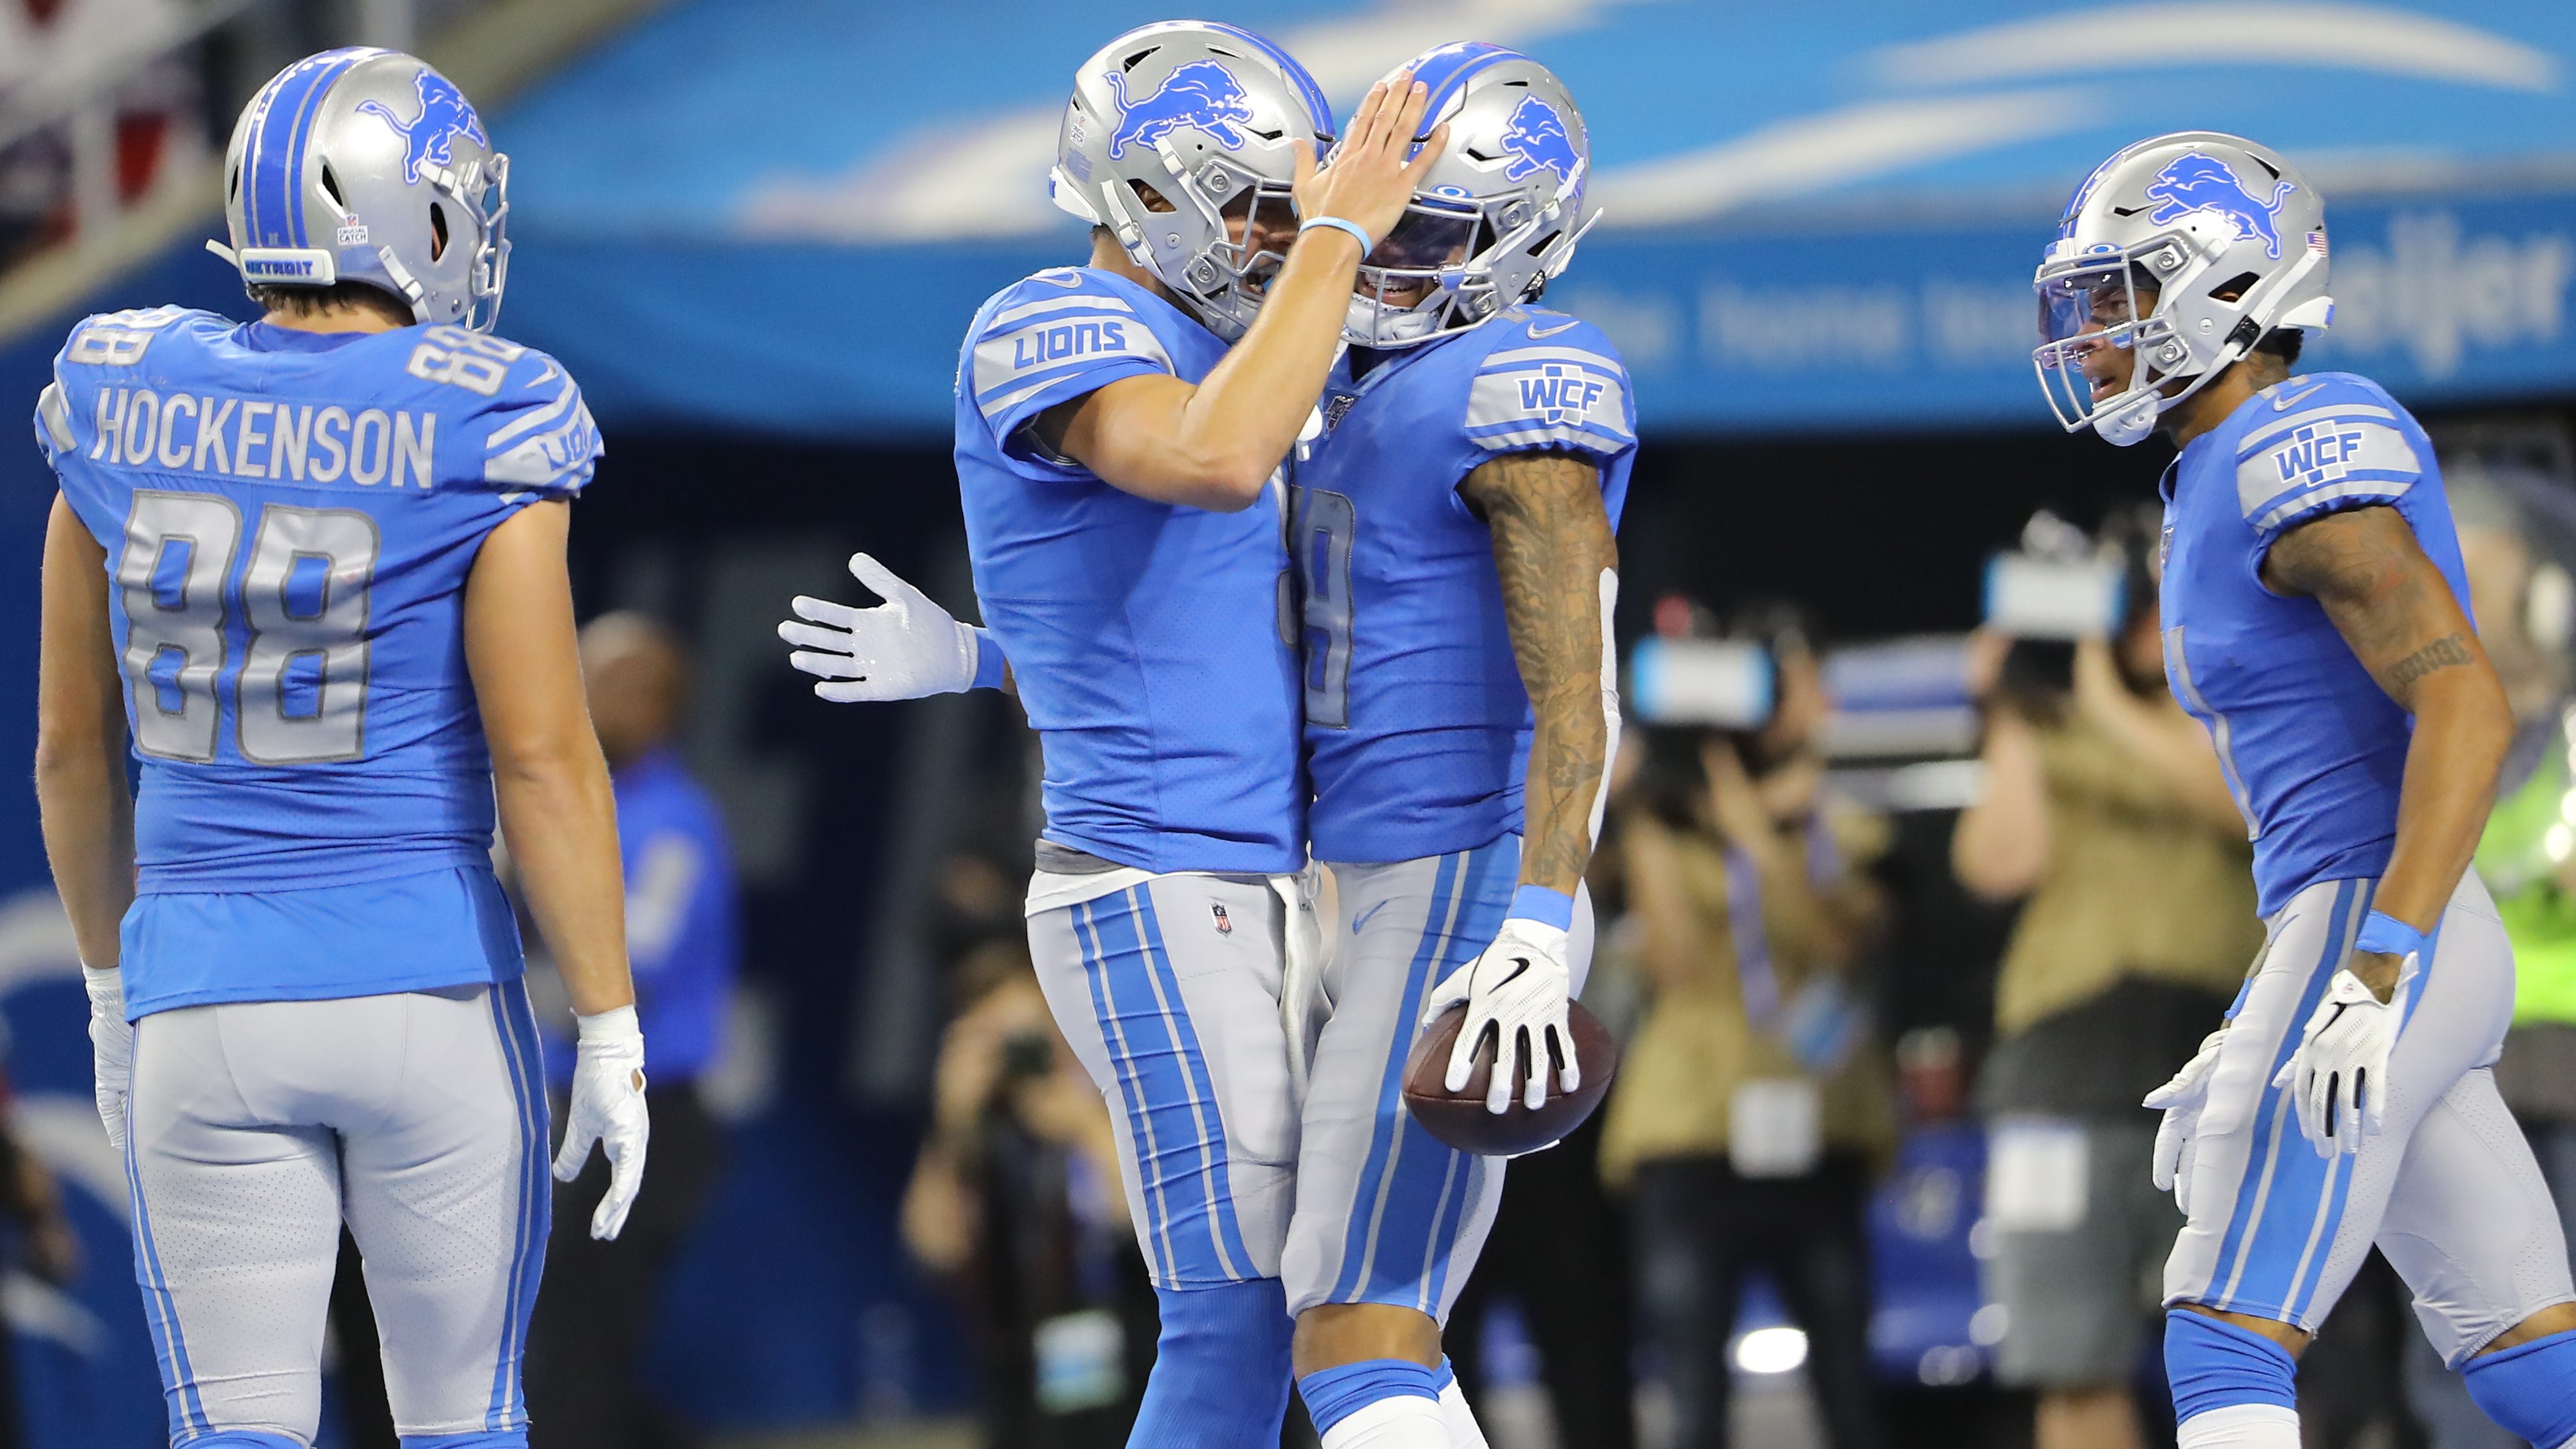 Lions Wide Receivers Ranked as One of NFL's Best Groups